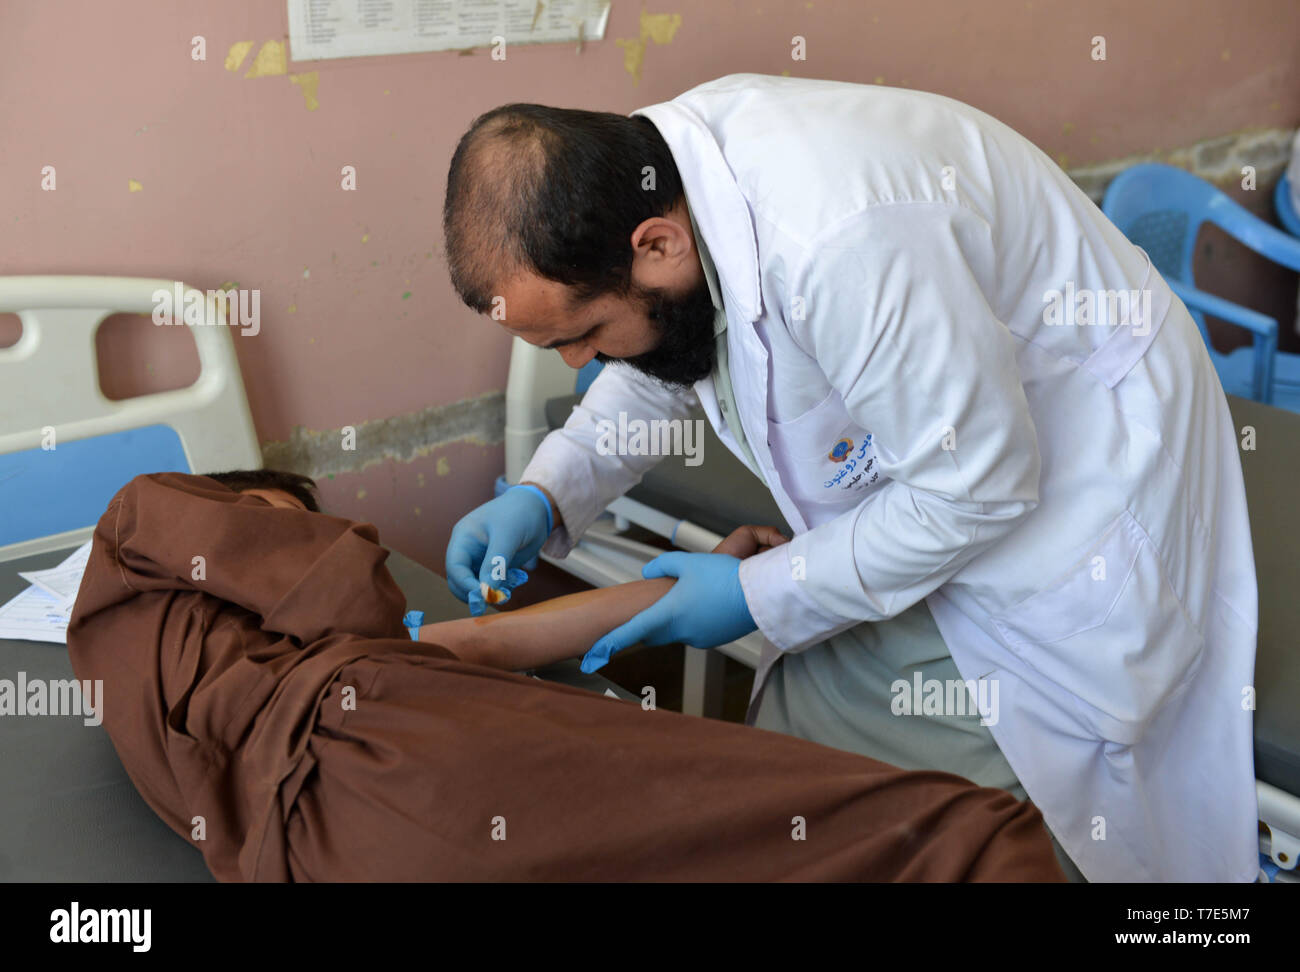 (190507) -- KANDAHAR, May 7, 2019 (Xinhua) -- An Afghan man receives medical treatment at the Mirwais Regional Hospital in Kandahar, Afghanistan, May 4, 2019. The Mirwais Regional Hospital, locally known as the 'Chinese Hospital', was built by China in 1974 and put into operation in 1979 on 44 acres of land in Kandahar, the largest city in the southern region as a gift to the Afghan people. The hospital is the largest health center in Afghanistan's southern region and provides almost all kinds of services to patients ranging from diagnosis of diseases to surgery of war victims, childcare and m Stock Photo